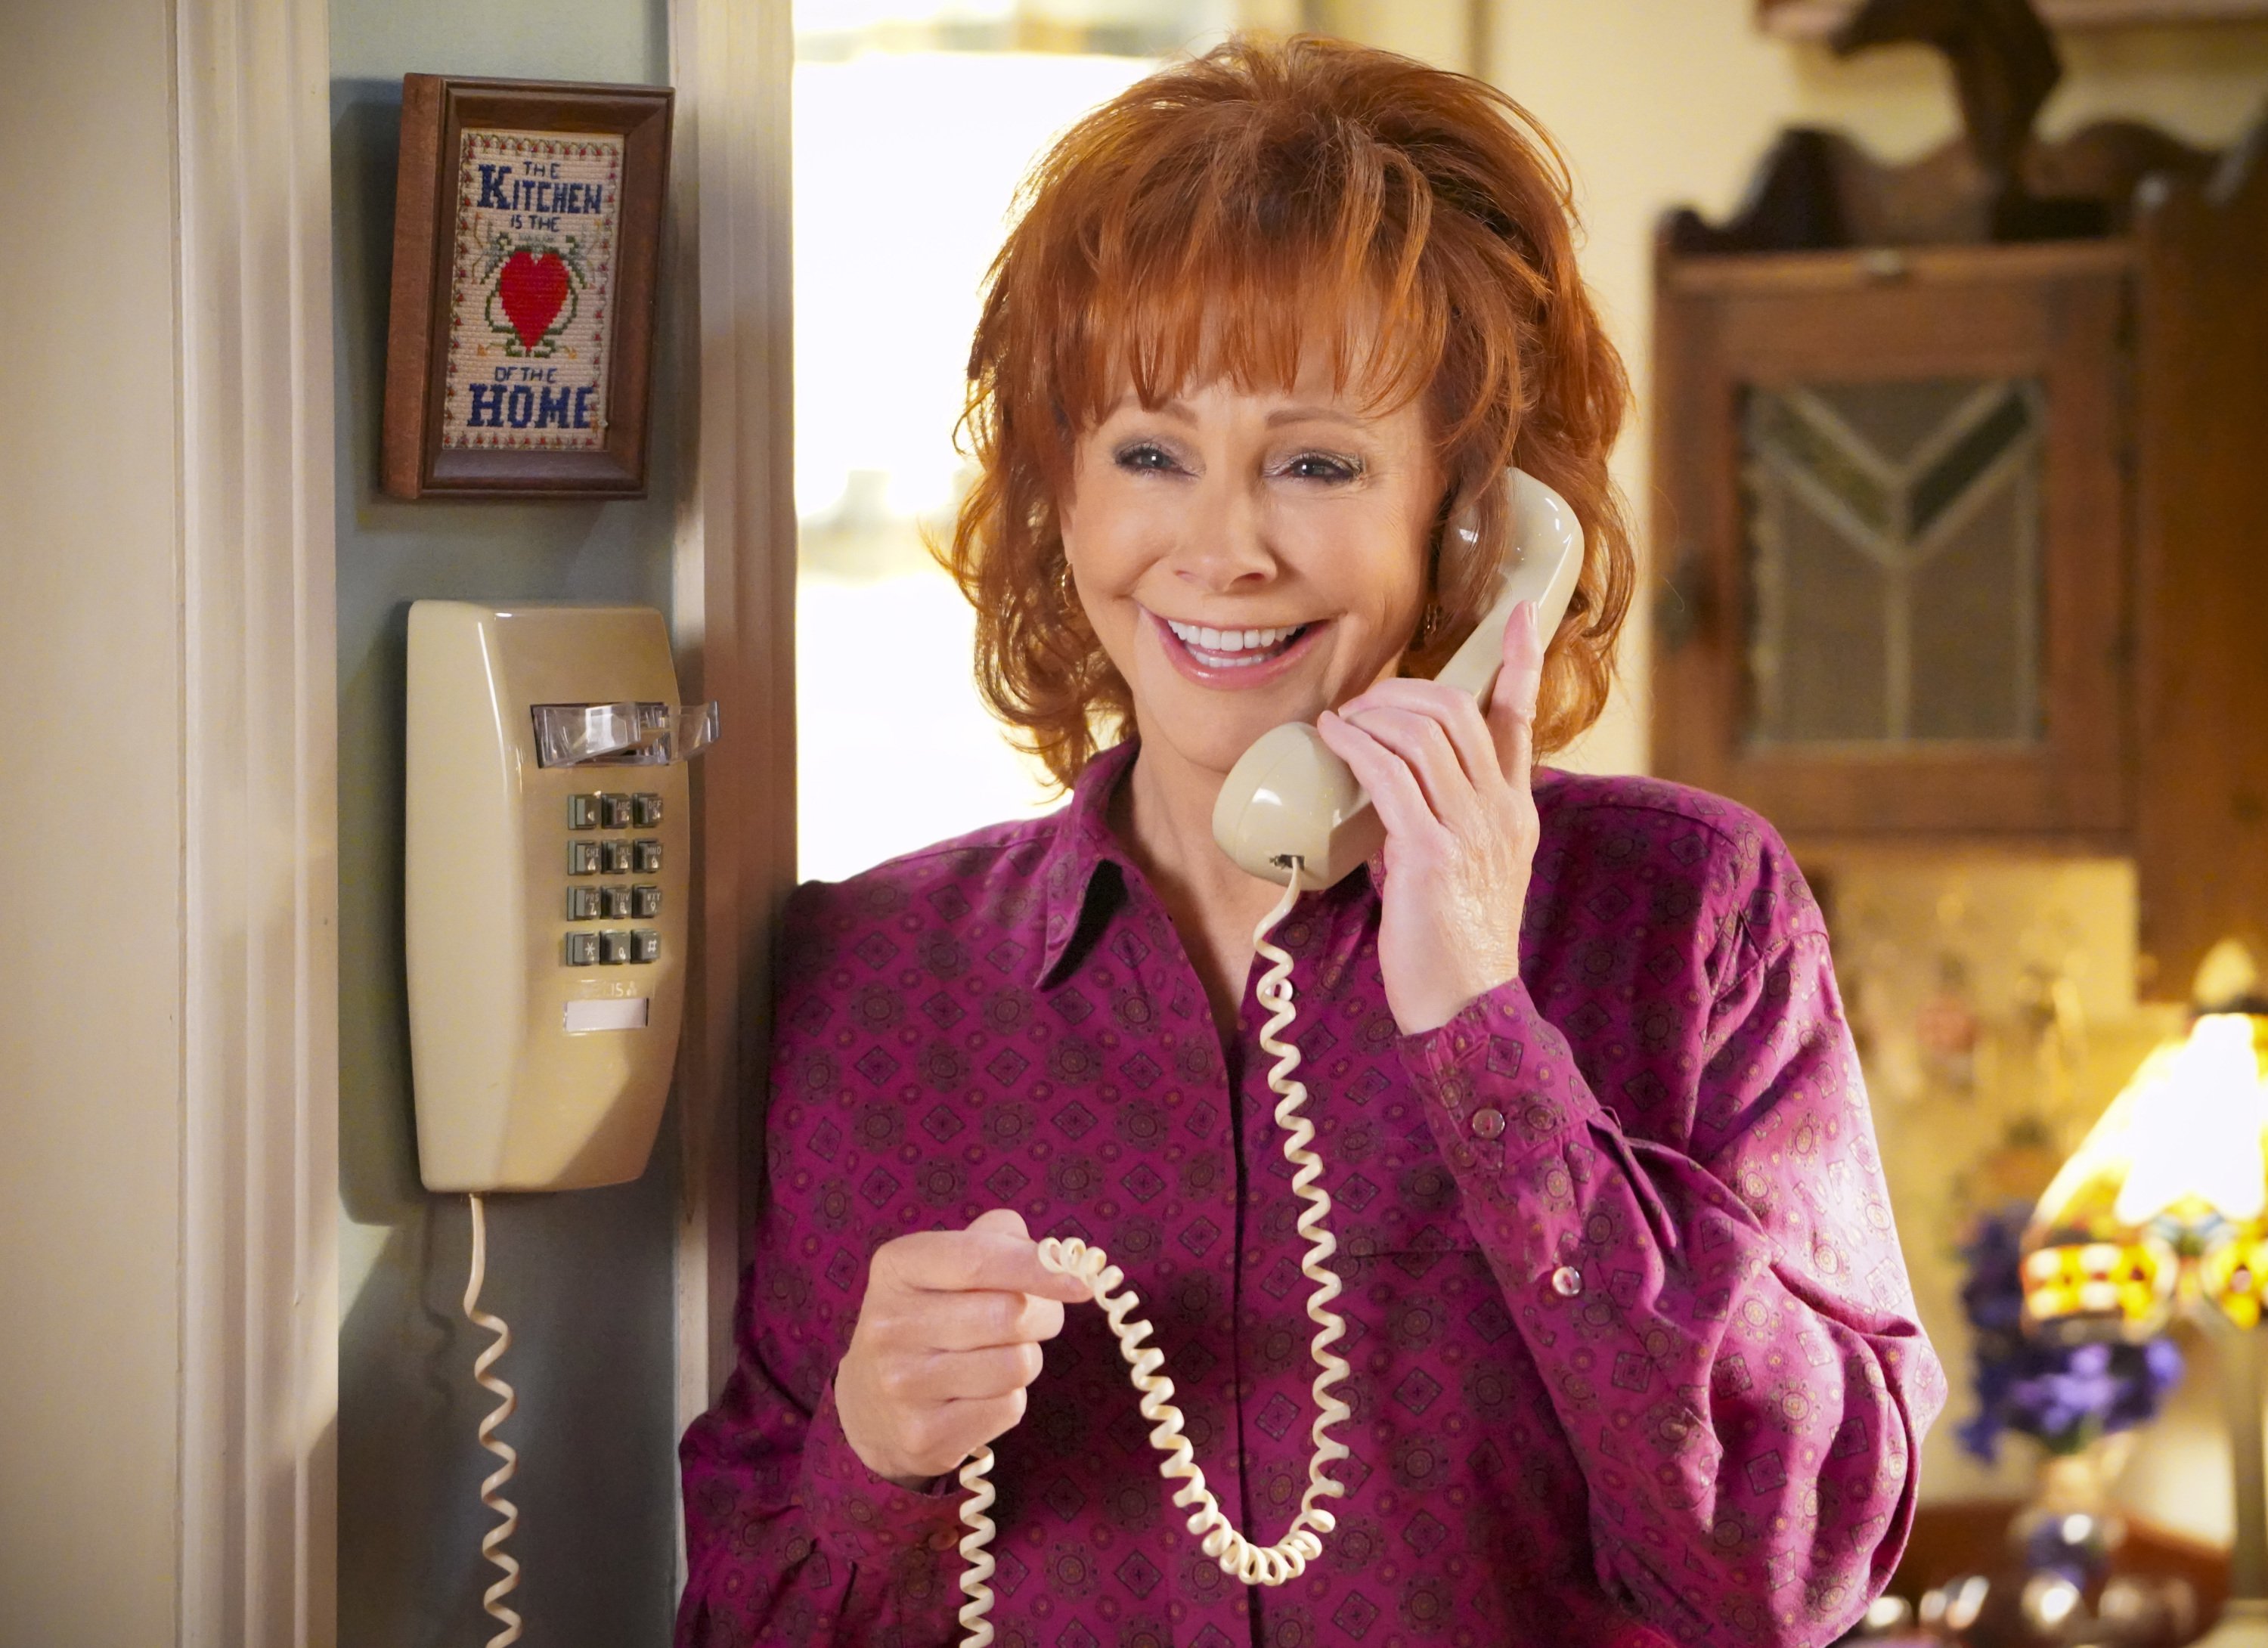 Reba McEntire on "Young Sheldon" in January 2020. | Source: Getty Images.